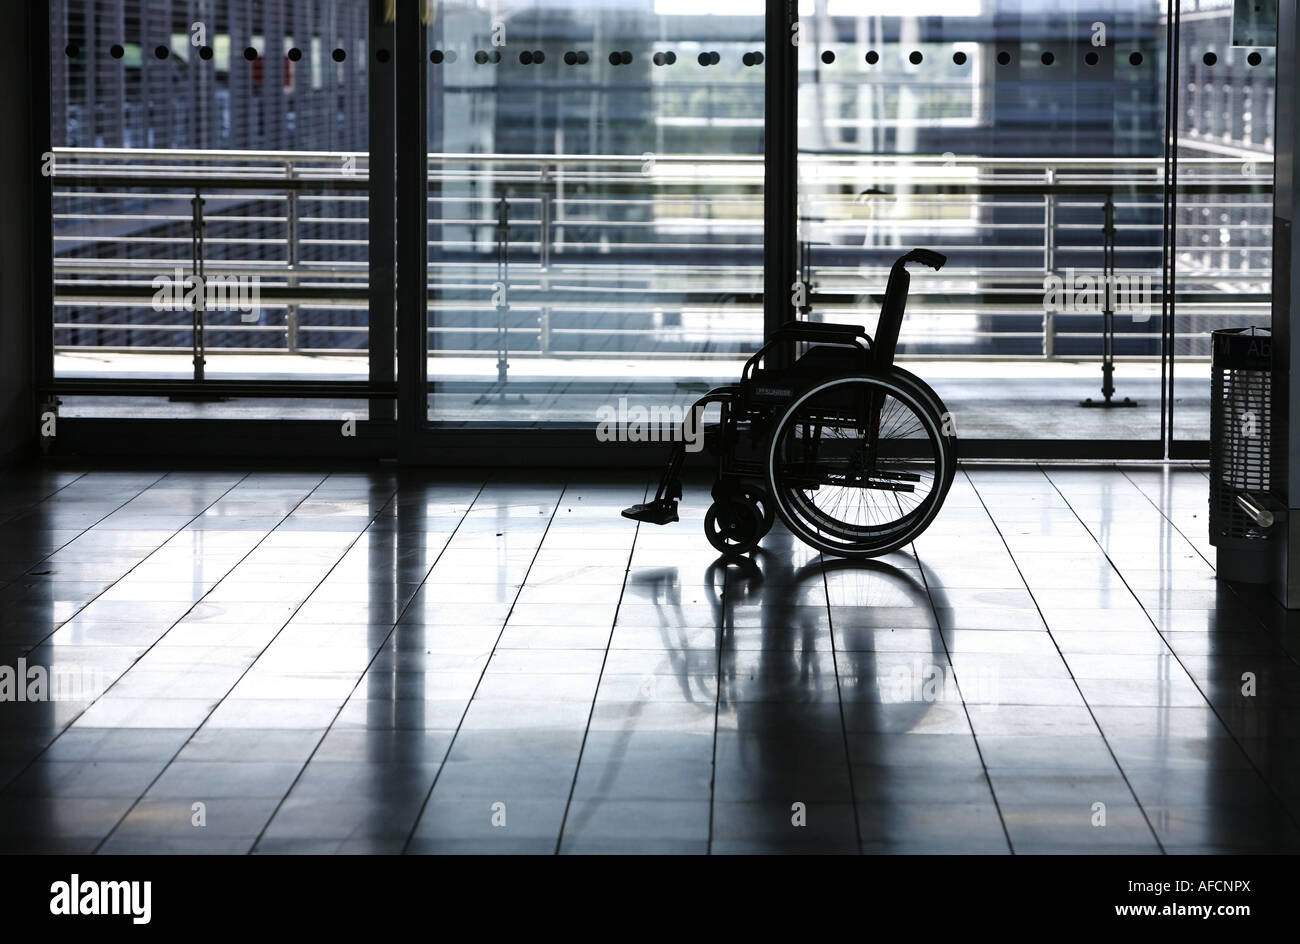 Illustration seniority and disease: wheel chair standing deserted at Munich Airport 04.09.2007 Stock Photo